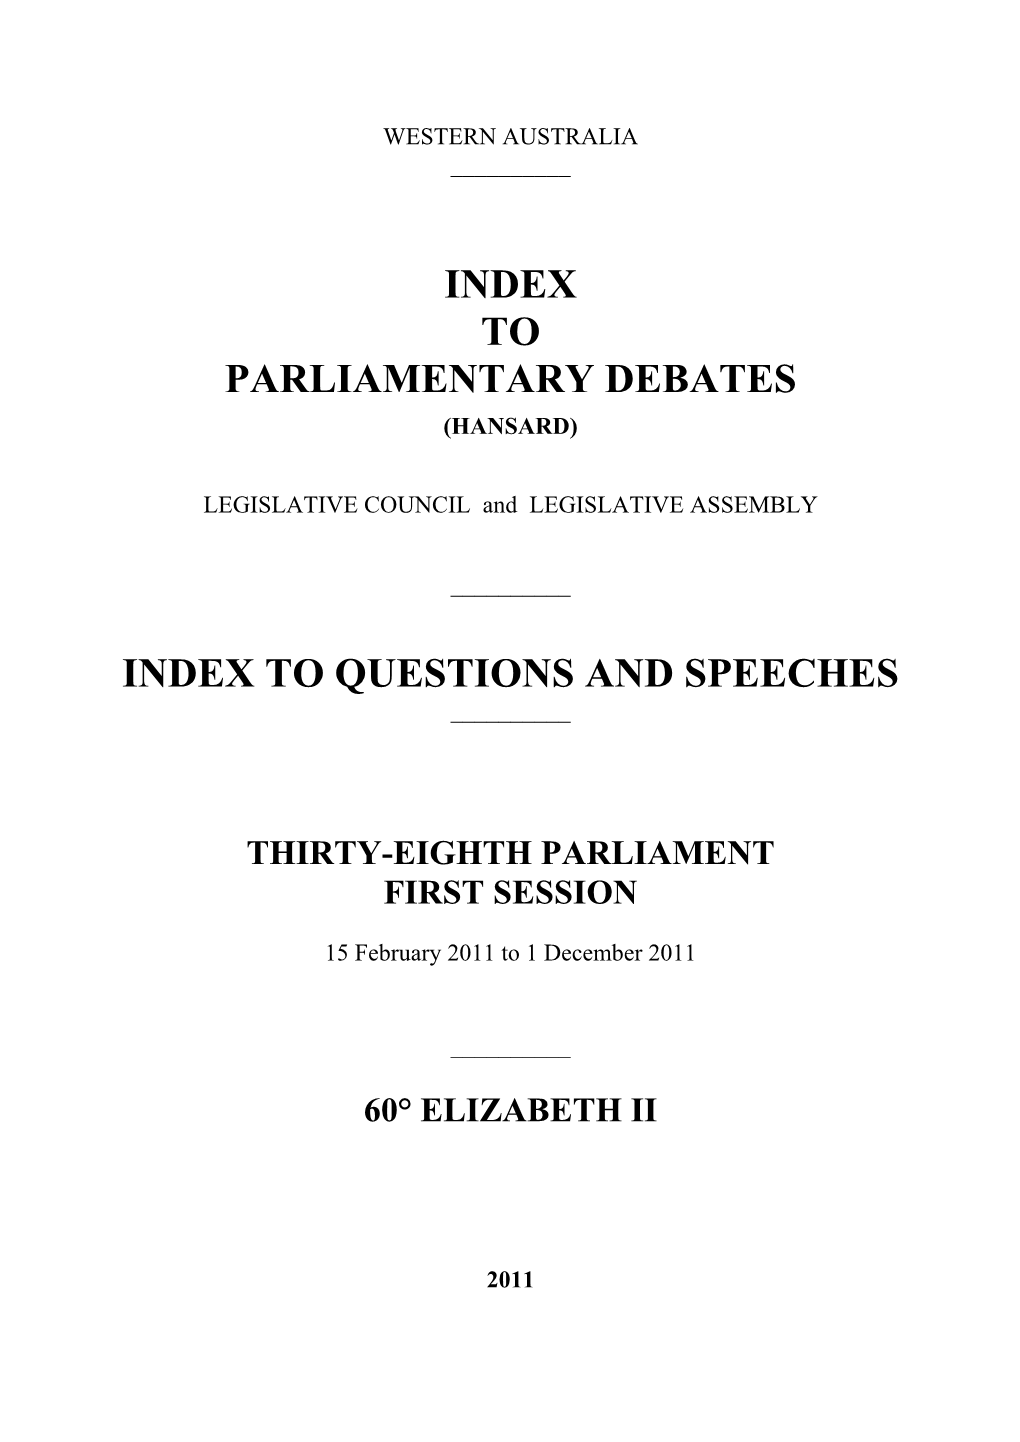 To Parliamentary Debates Index to Questions and Speeches